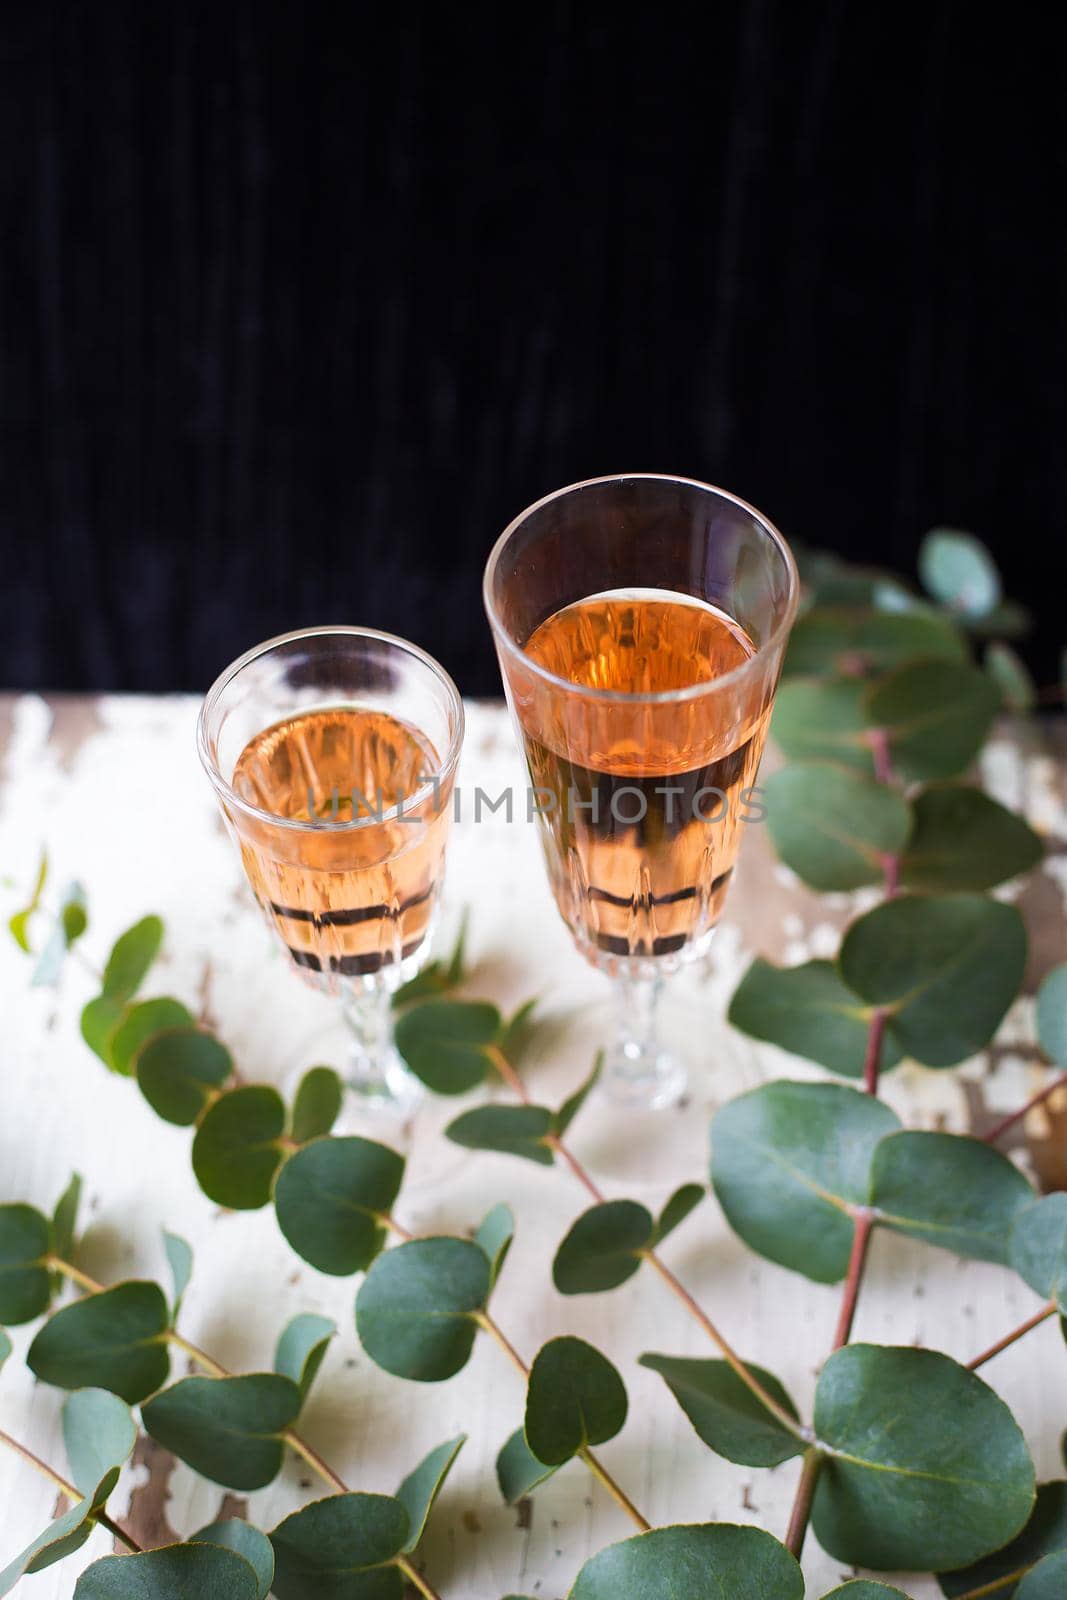 eucalyptus branches on an old table with a glass of rose wine. by sfinks